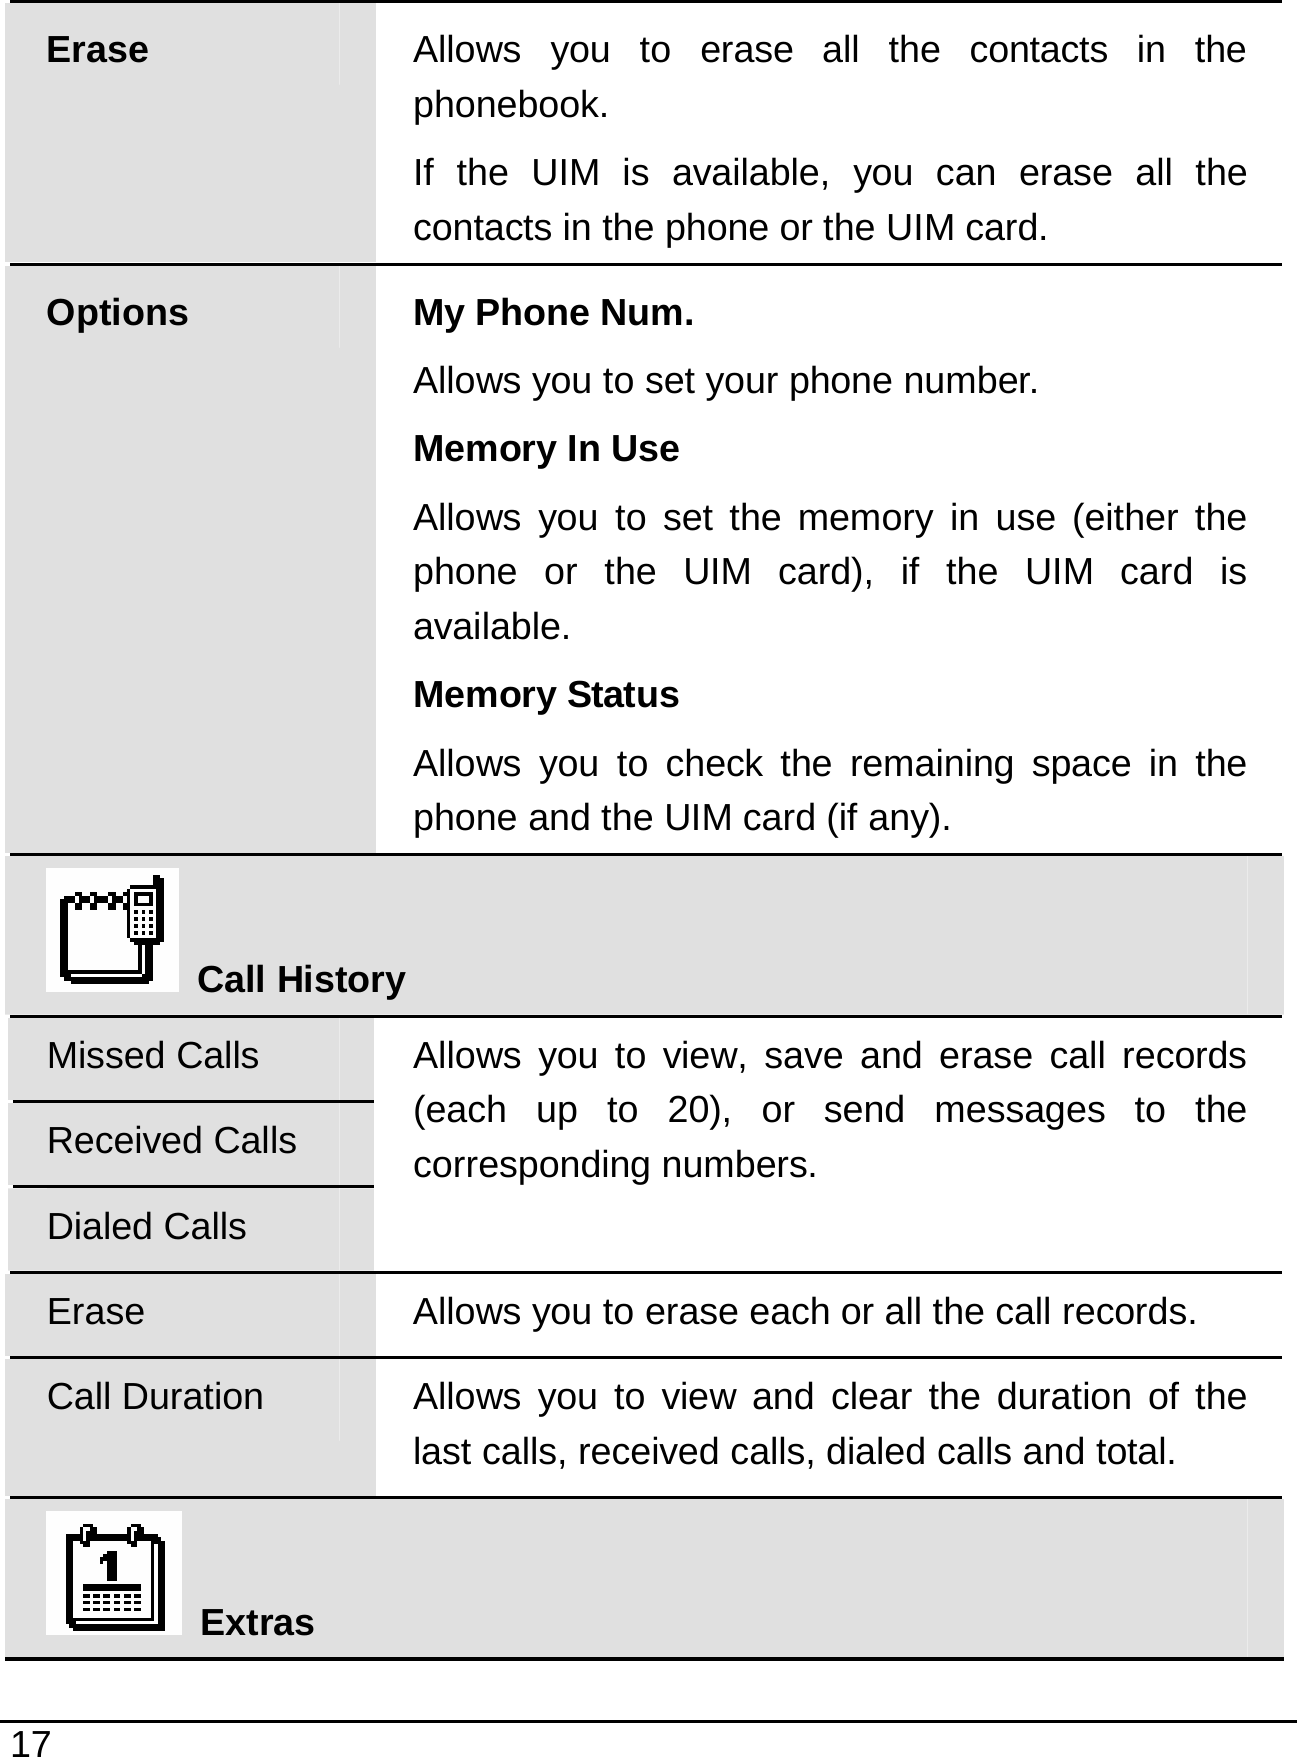   17  Erase  Allows you to erase all the contacts in the phonebook. If the UIM is available, you can erase all the contacts in the phone or the UIM card. Options My Phone Num. Allows you to set your phone number. Memory In Use Allows you to set the memory in use (either the phone or the UIM card), if the UIM card is available. Memory Status Allows you to check the remaining space in the phone and the UIM card (if any).  Call History Missed Calls Received Calls Dialed Calls Allows you to view, save and erase call records (each up to 20), or send messages to the corresponding numbers. Erase  Allows you to erase each or all the call records. Call Duration  Allows you to view and clear the duration of the last calls, received calls, dialed calls and total.  Extras 